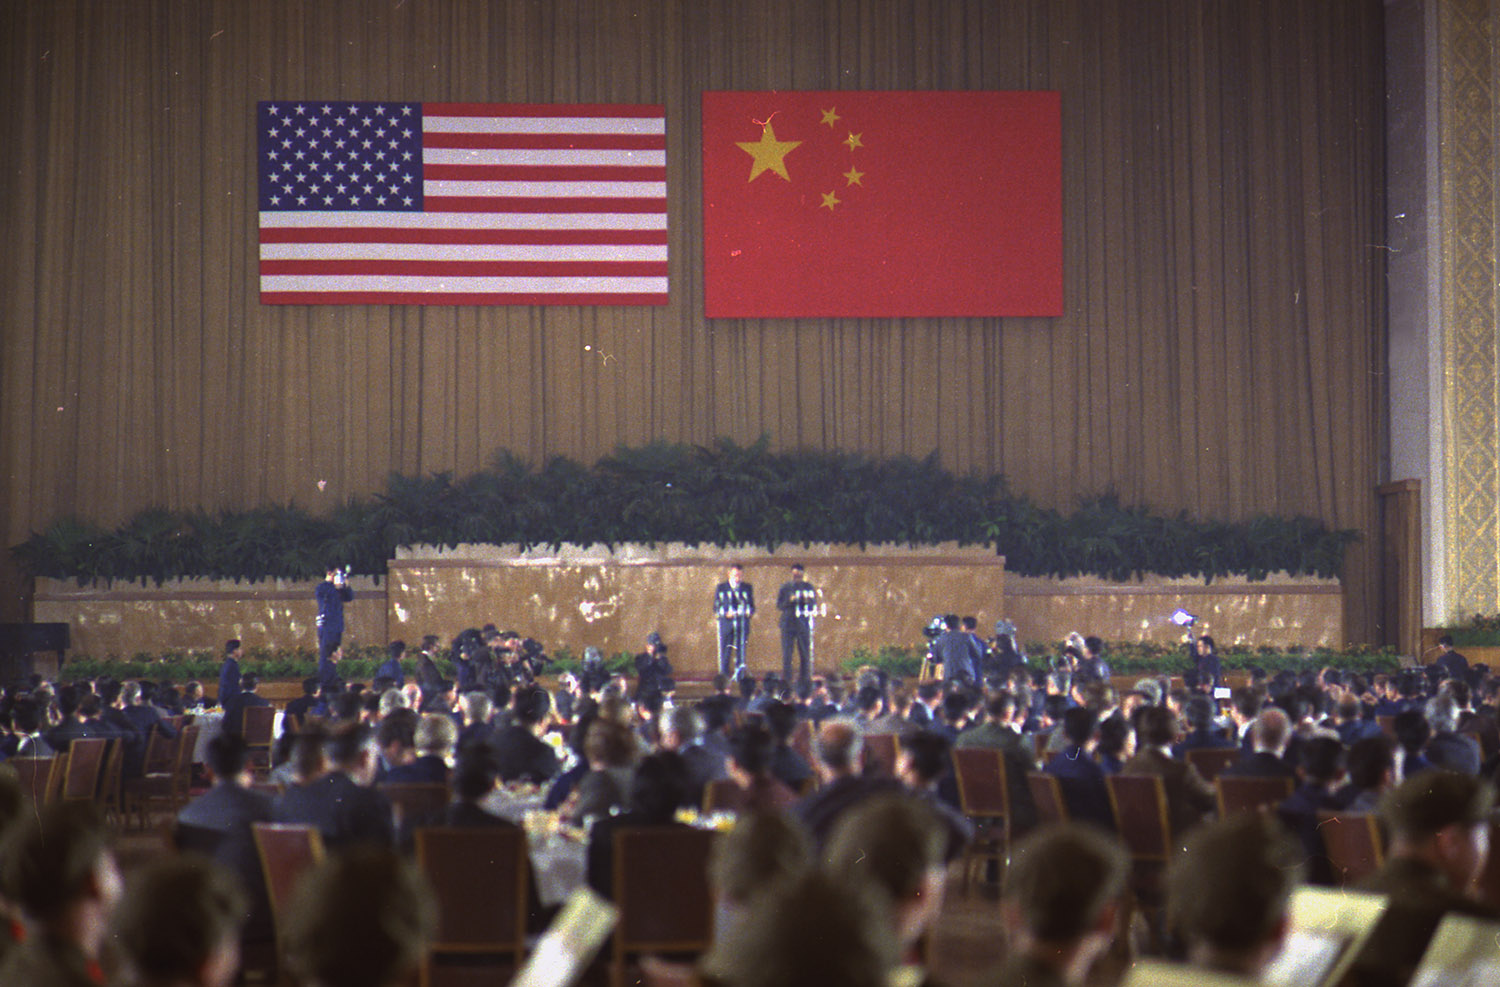 Richard Nixon and Zhou Enlai speaking at a banquet, Beijing, 21 February 1972.